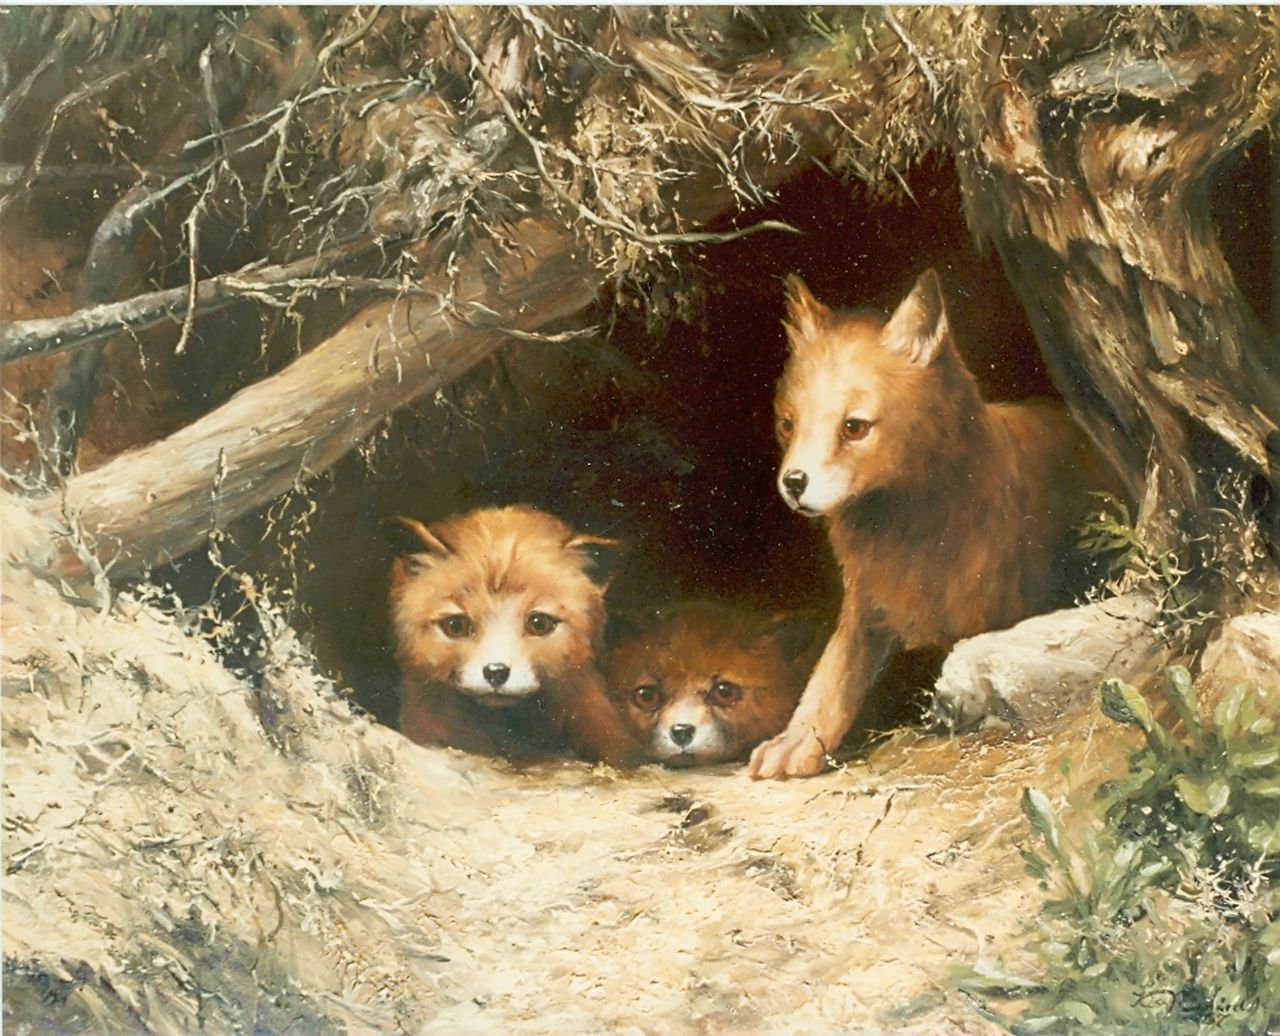 Kiss R.  | Richard Kiss, Foxes in their shelter, oil on canvas laid down on panel 40.5 x 50.5 cm, signed l.r. and dated '87